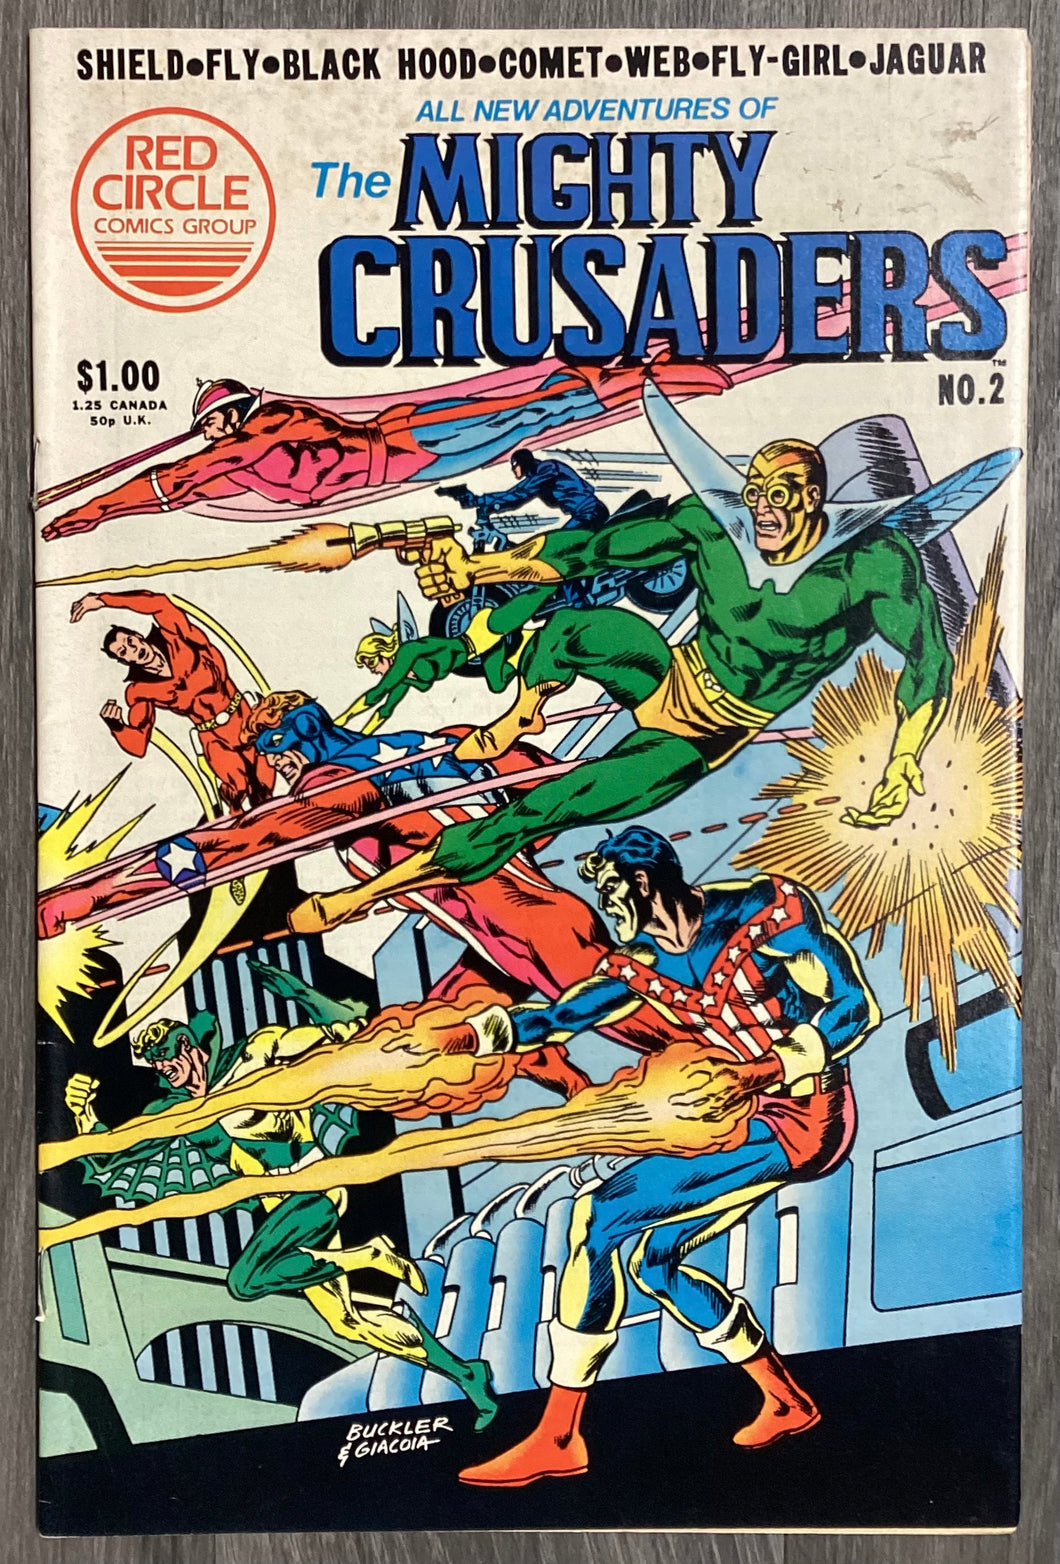 The All New Adventures of the Mighty Crusaders No. #2 1983 Red Circle Comics